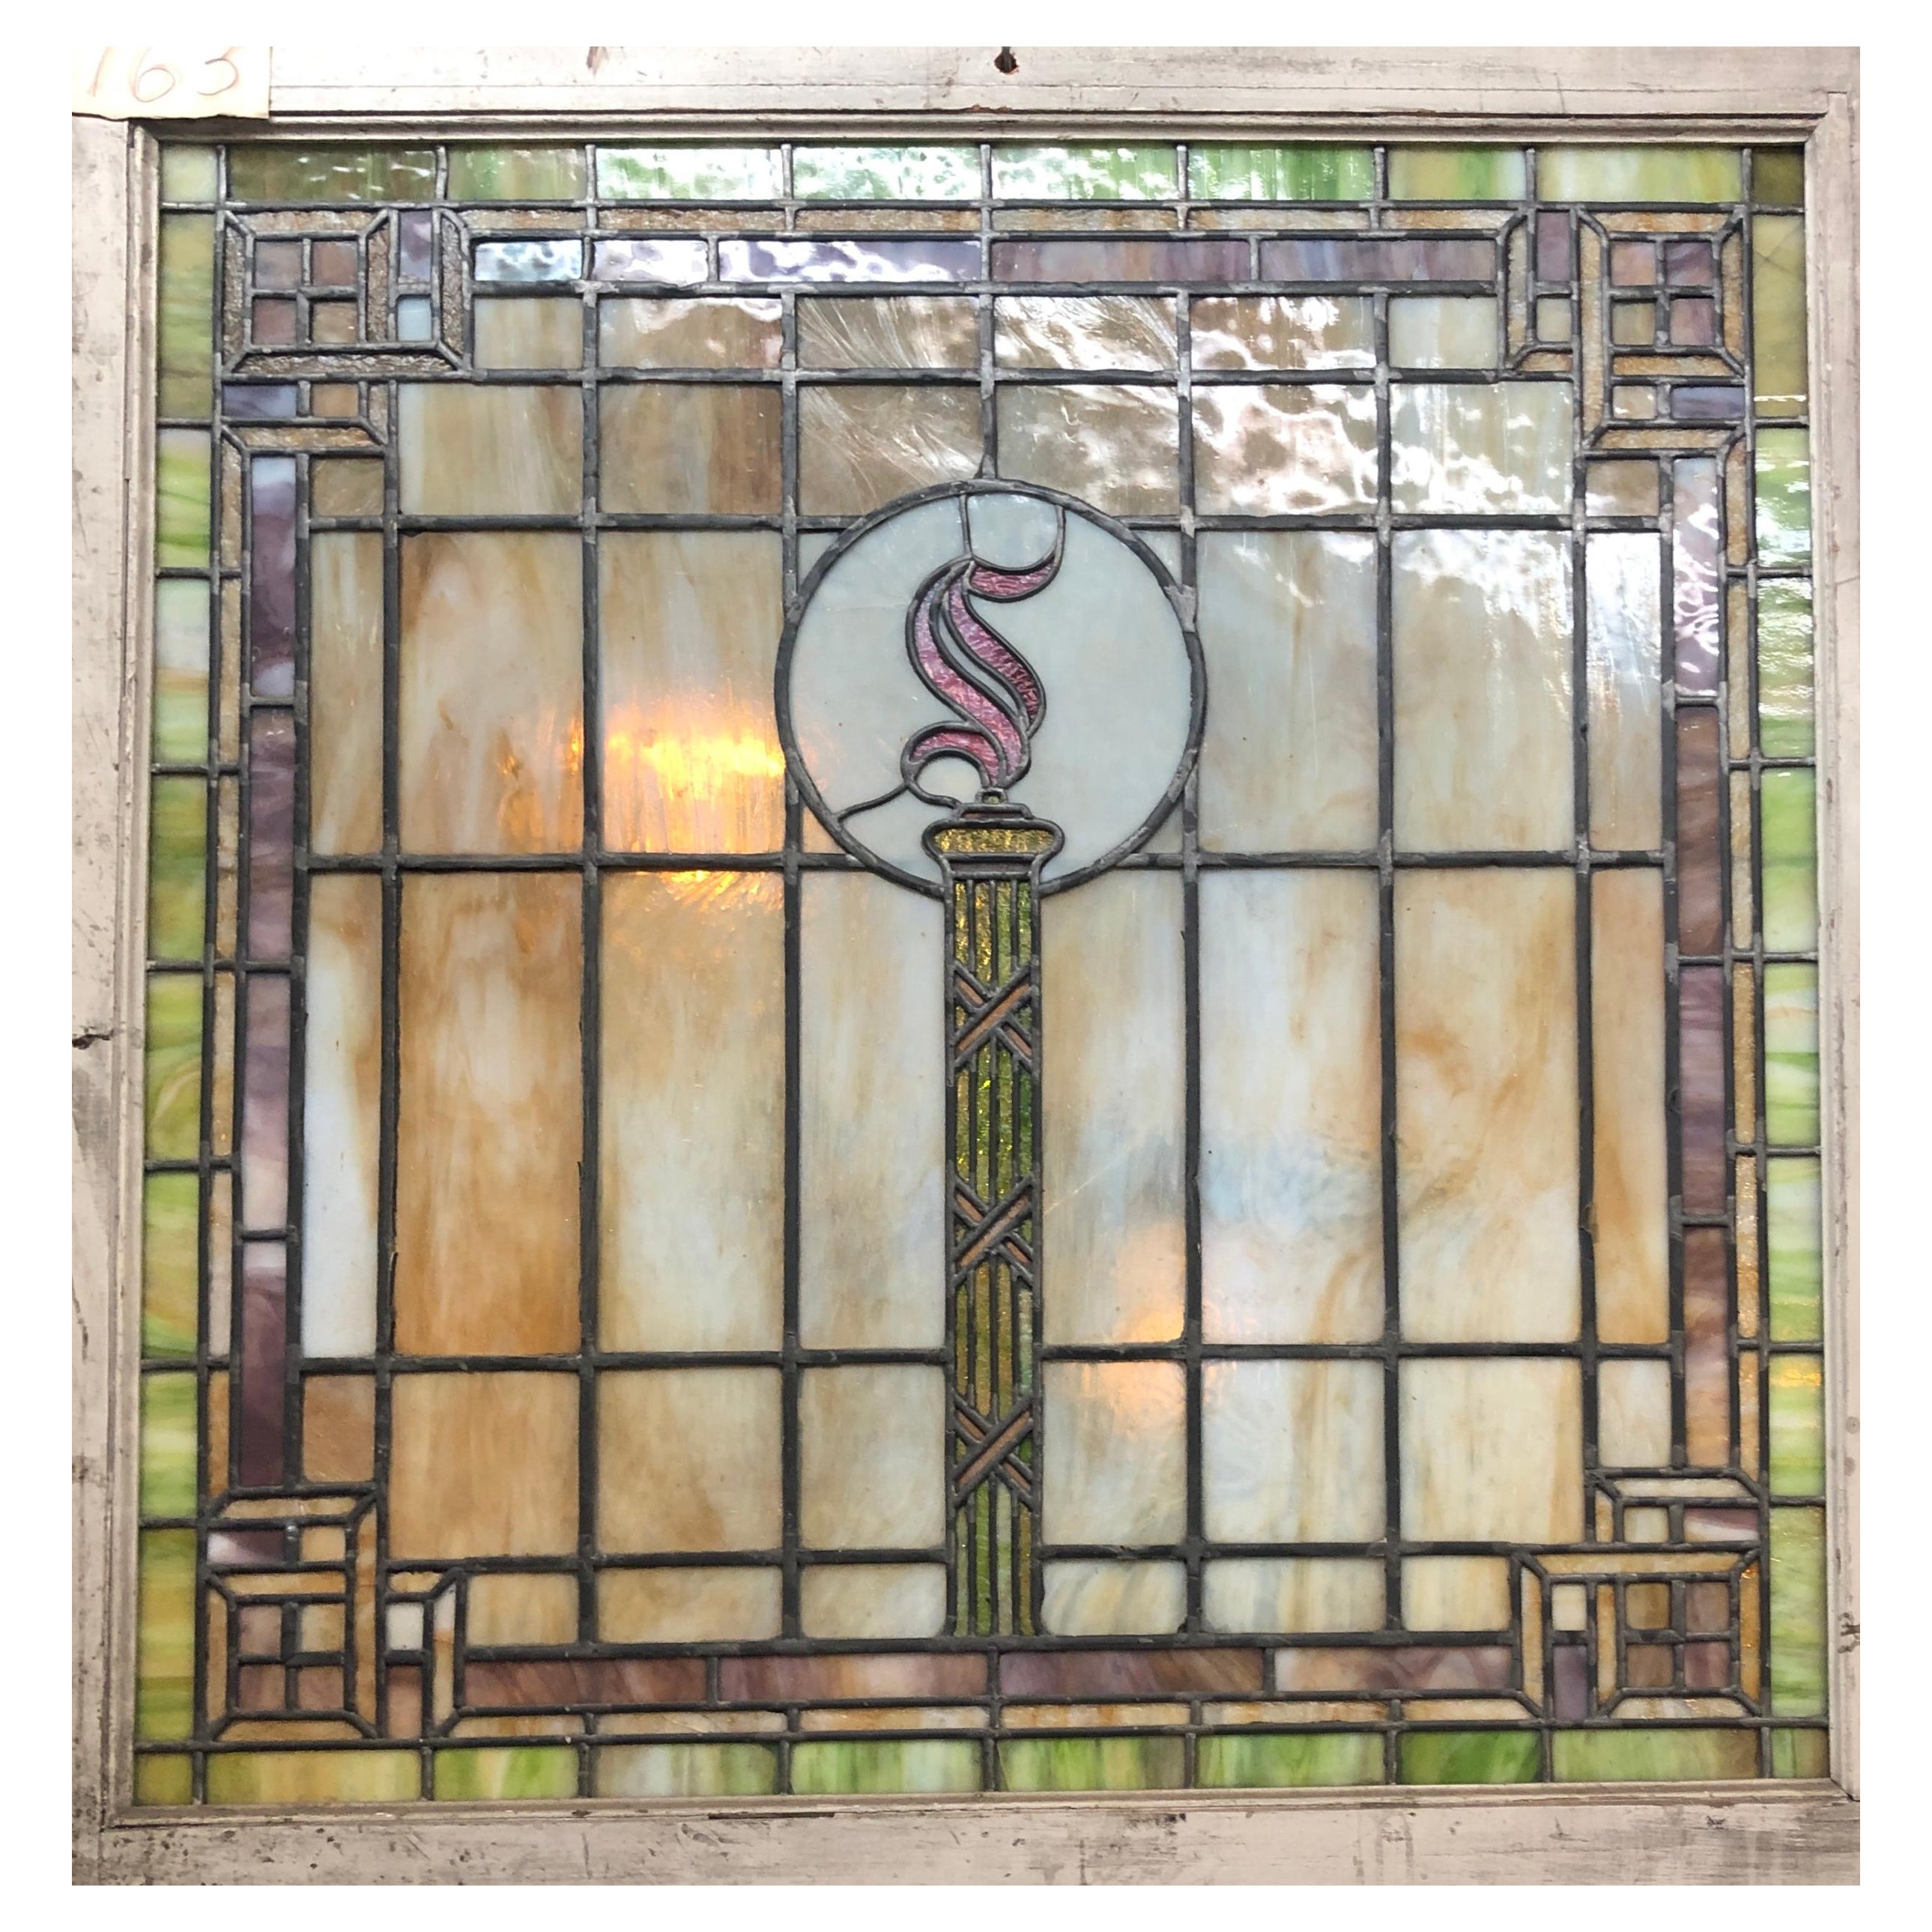 Large Stained Glass Window 42"x40" pair available